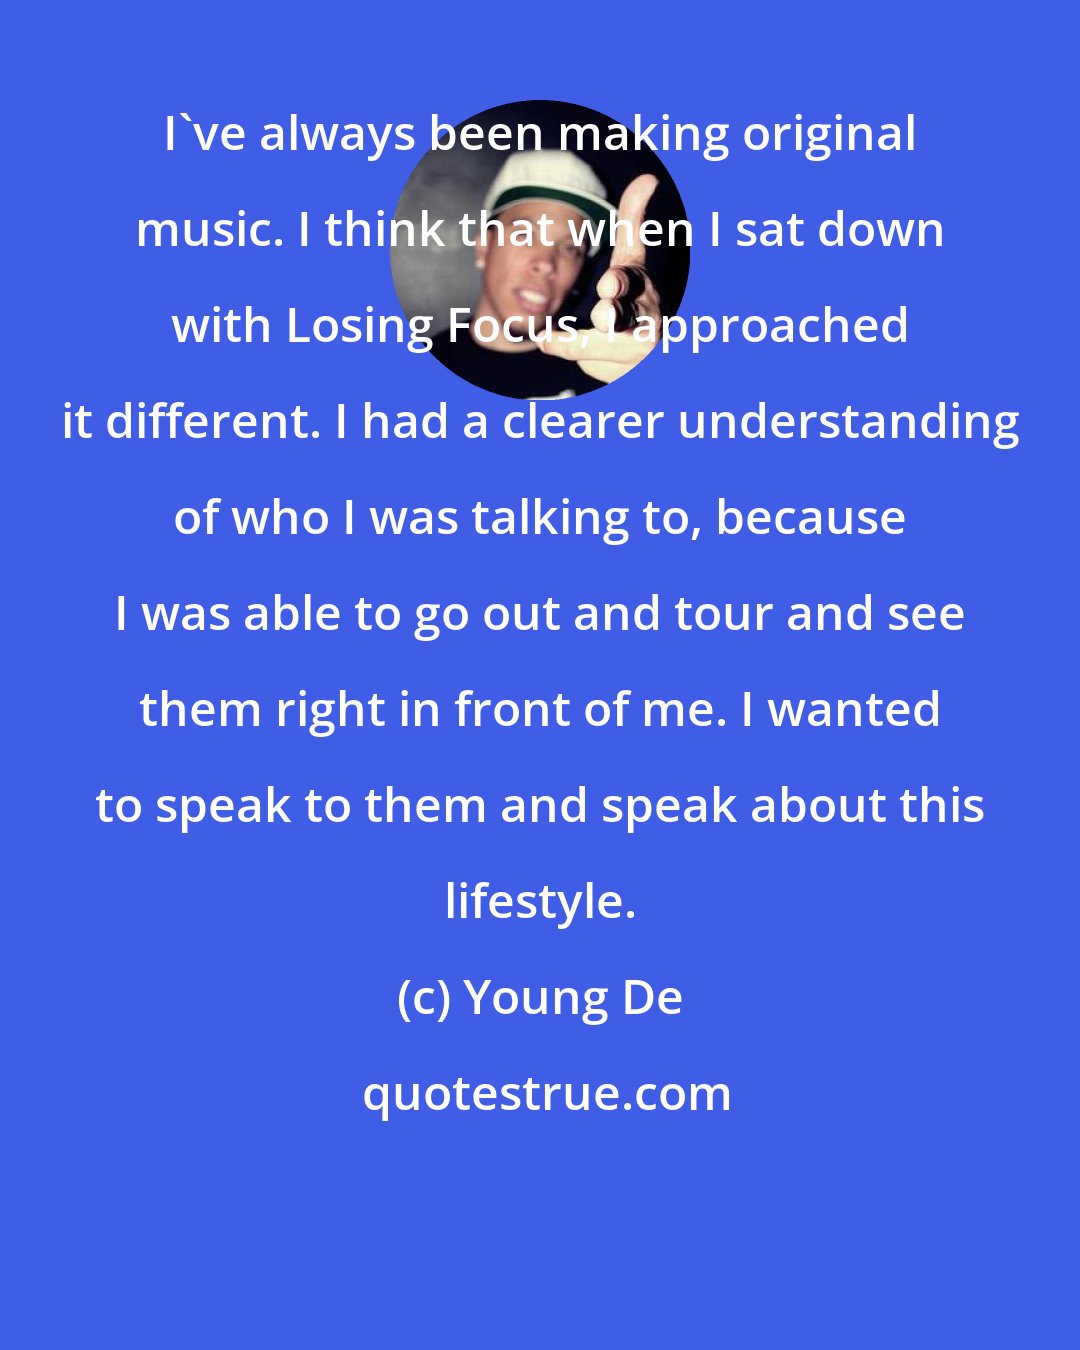 Young De: I've always been making original music. I think that when I sat down with Losing Focus, I approached it different. I had a clearer understanding of who I was talking to, because I was able to go out and tour and see them right in front of me. I wanted to speak to them and speak about this lifestyle.